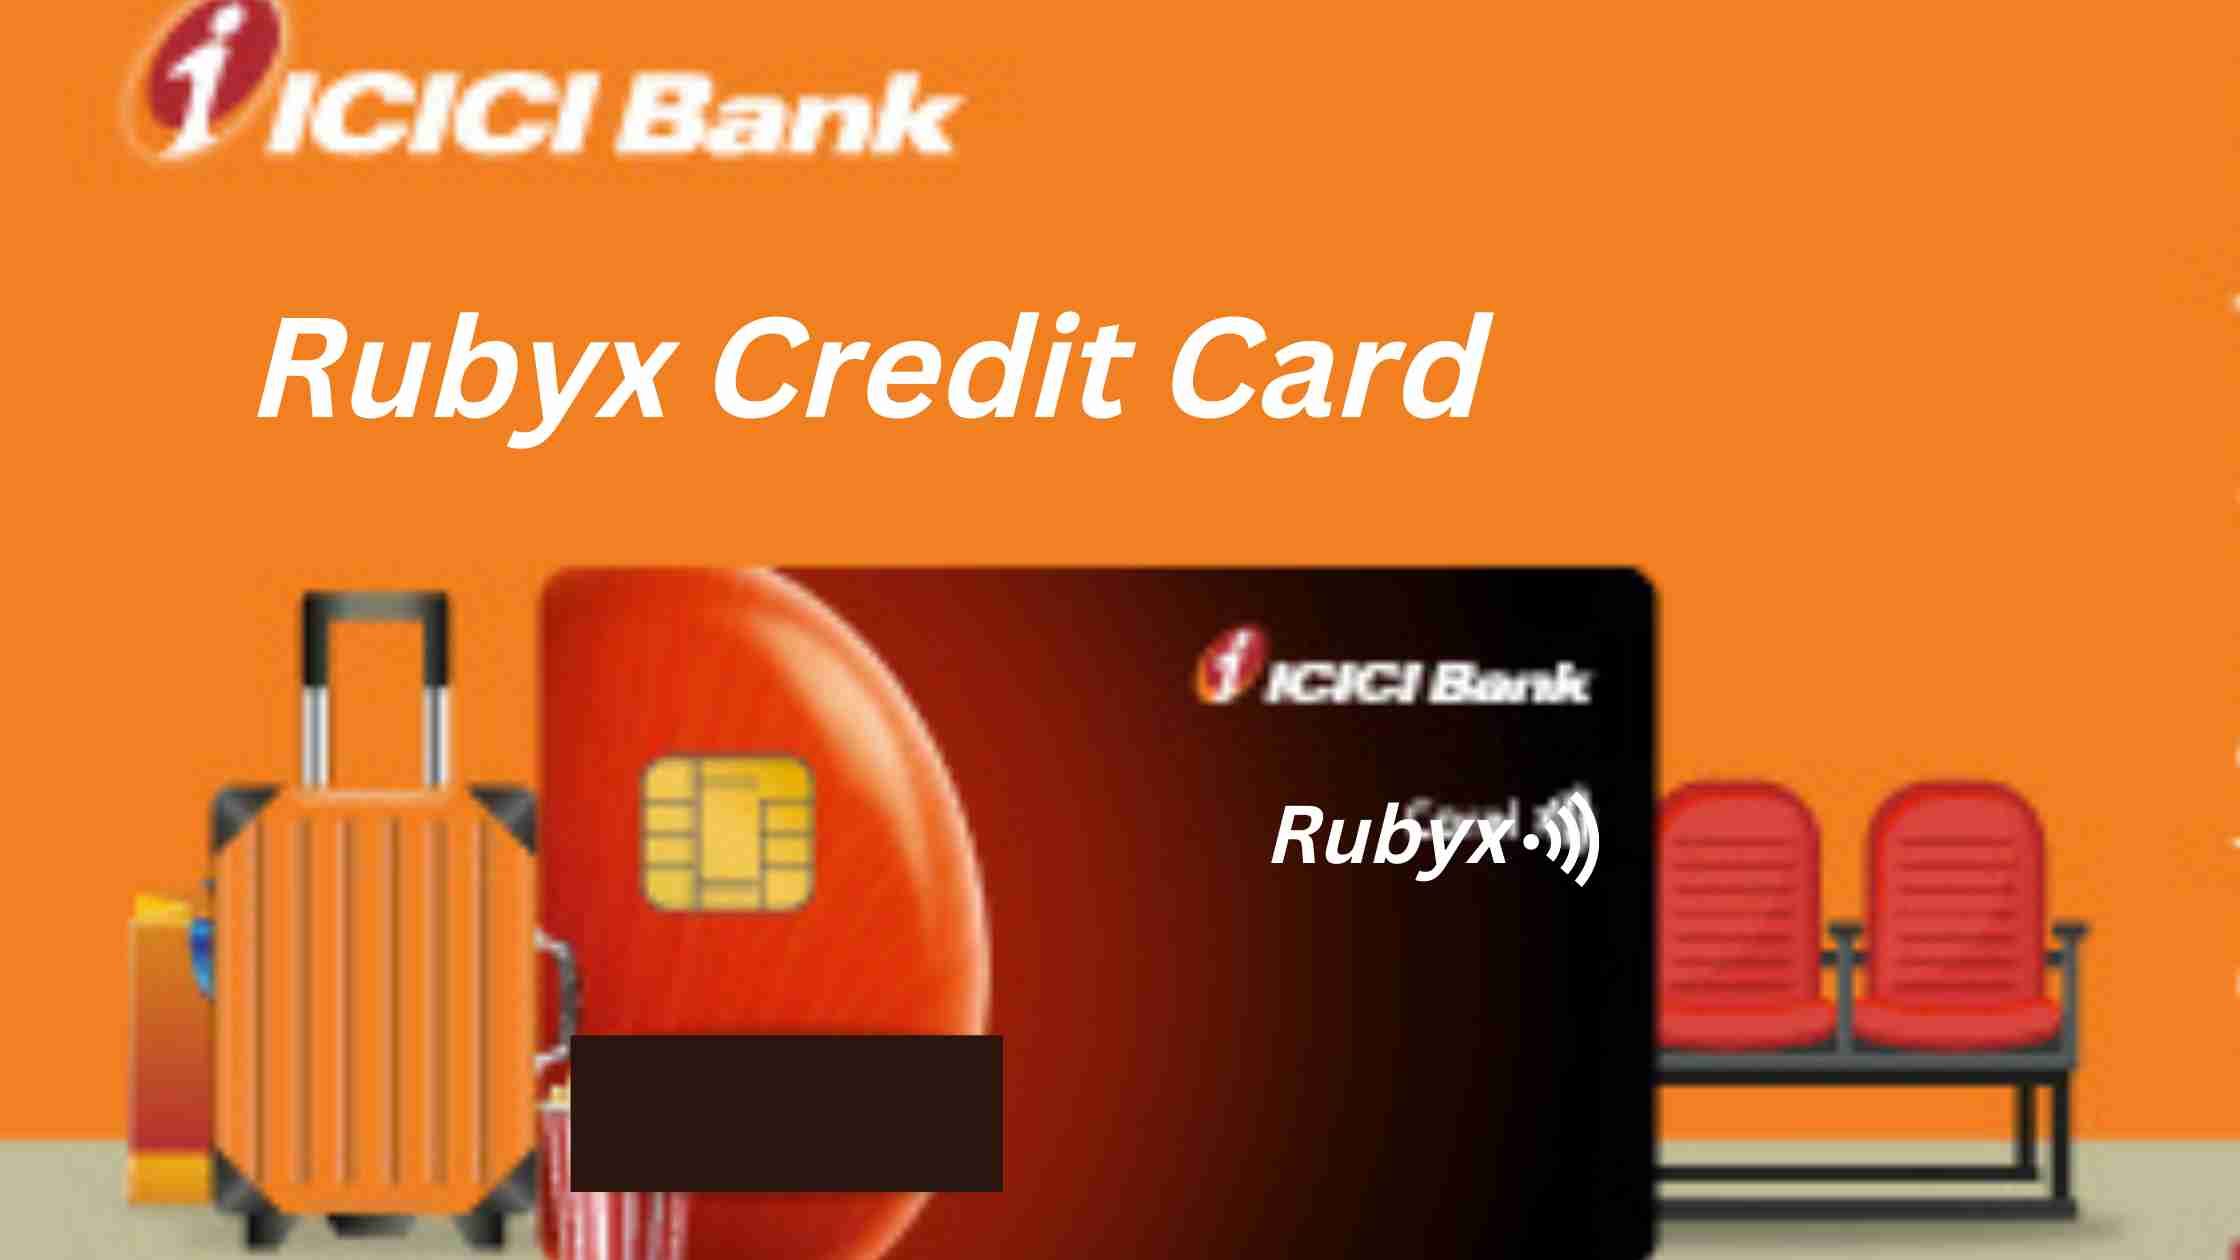 ICICI Bank Rubyx Credit Card Eligibility and Benefits